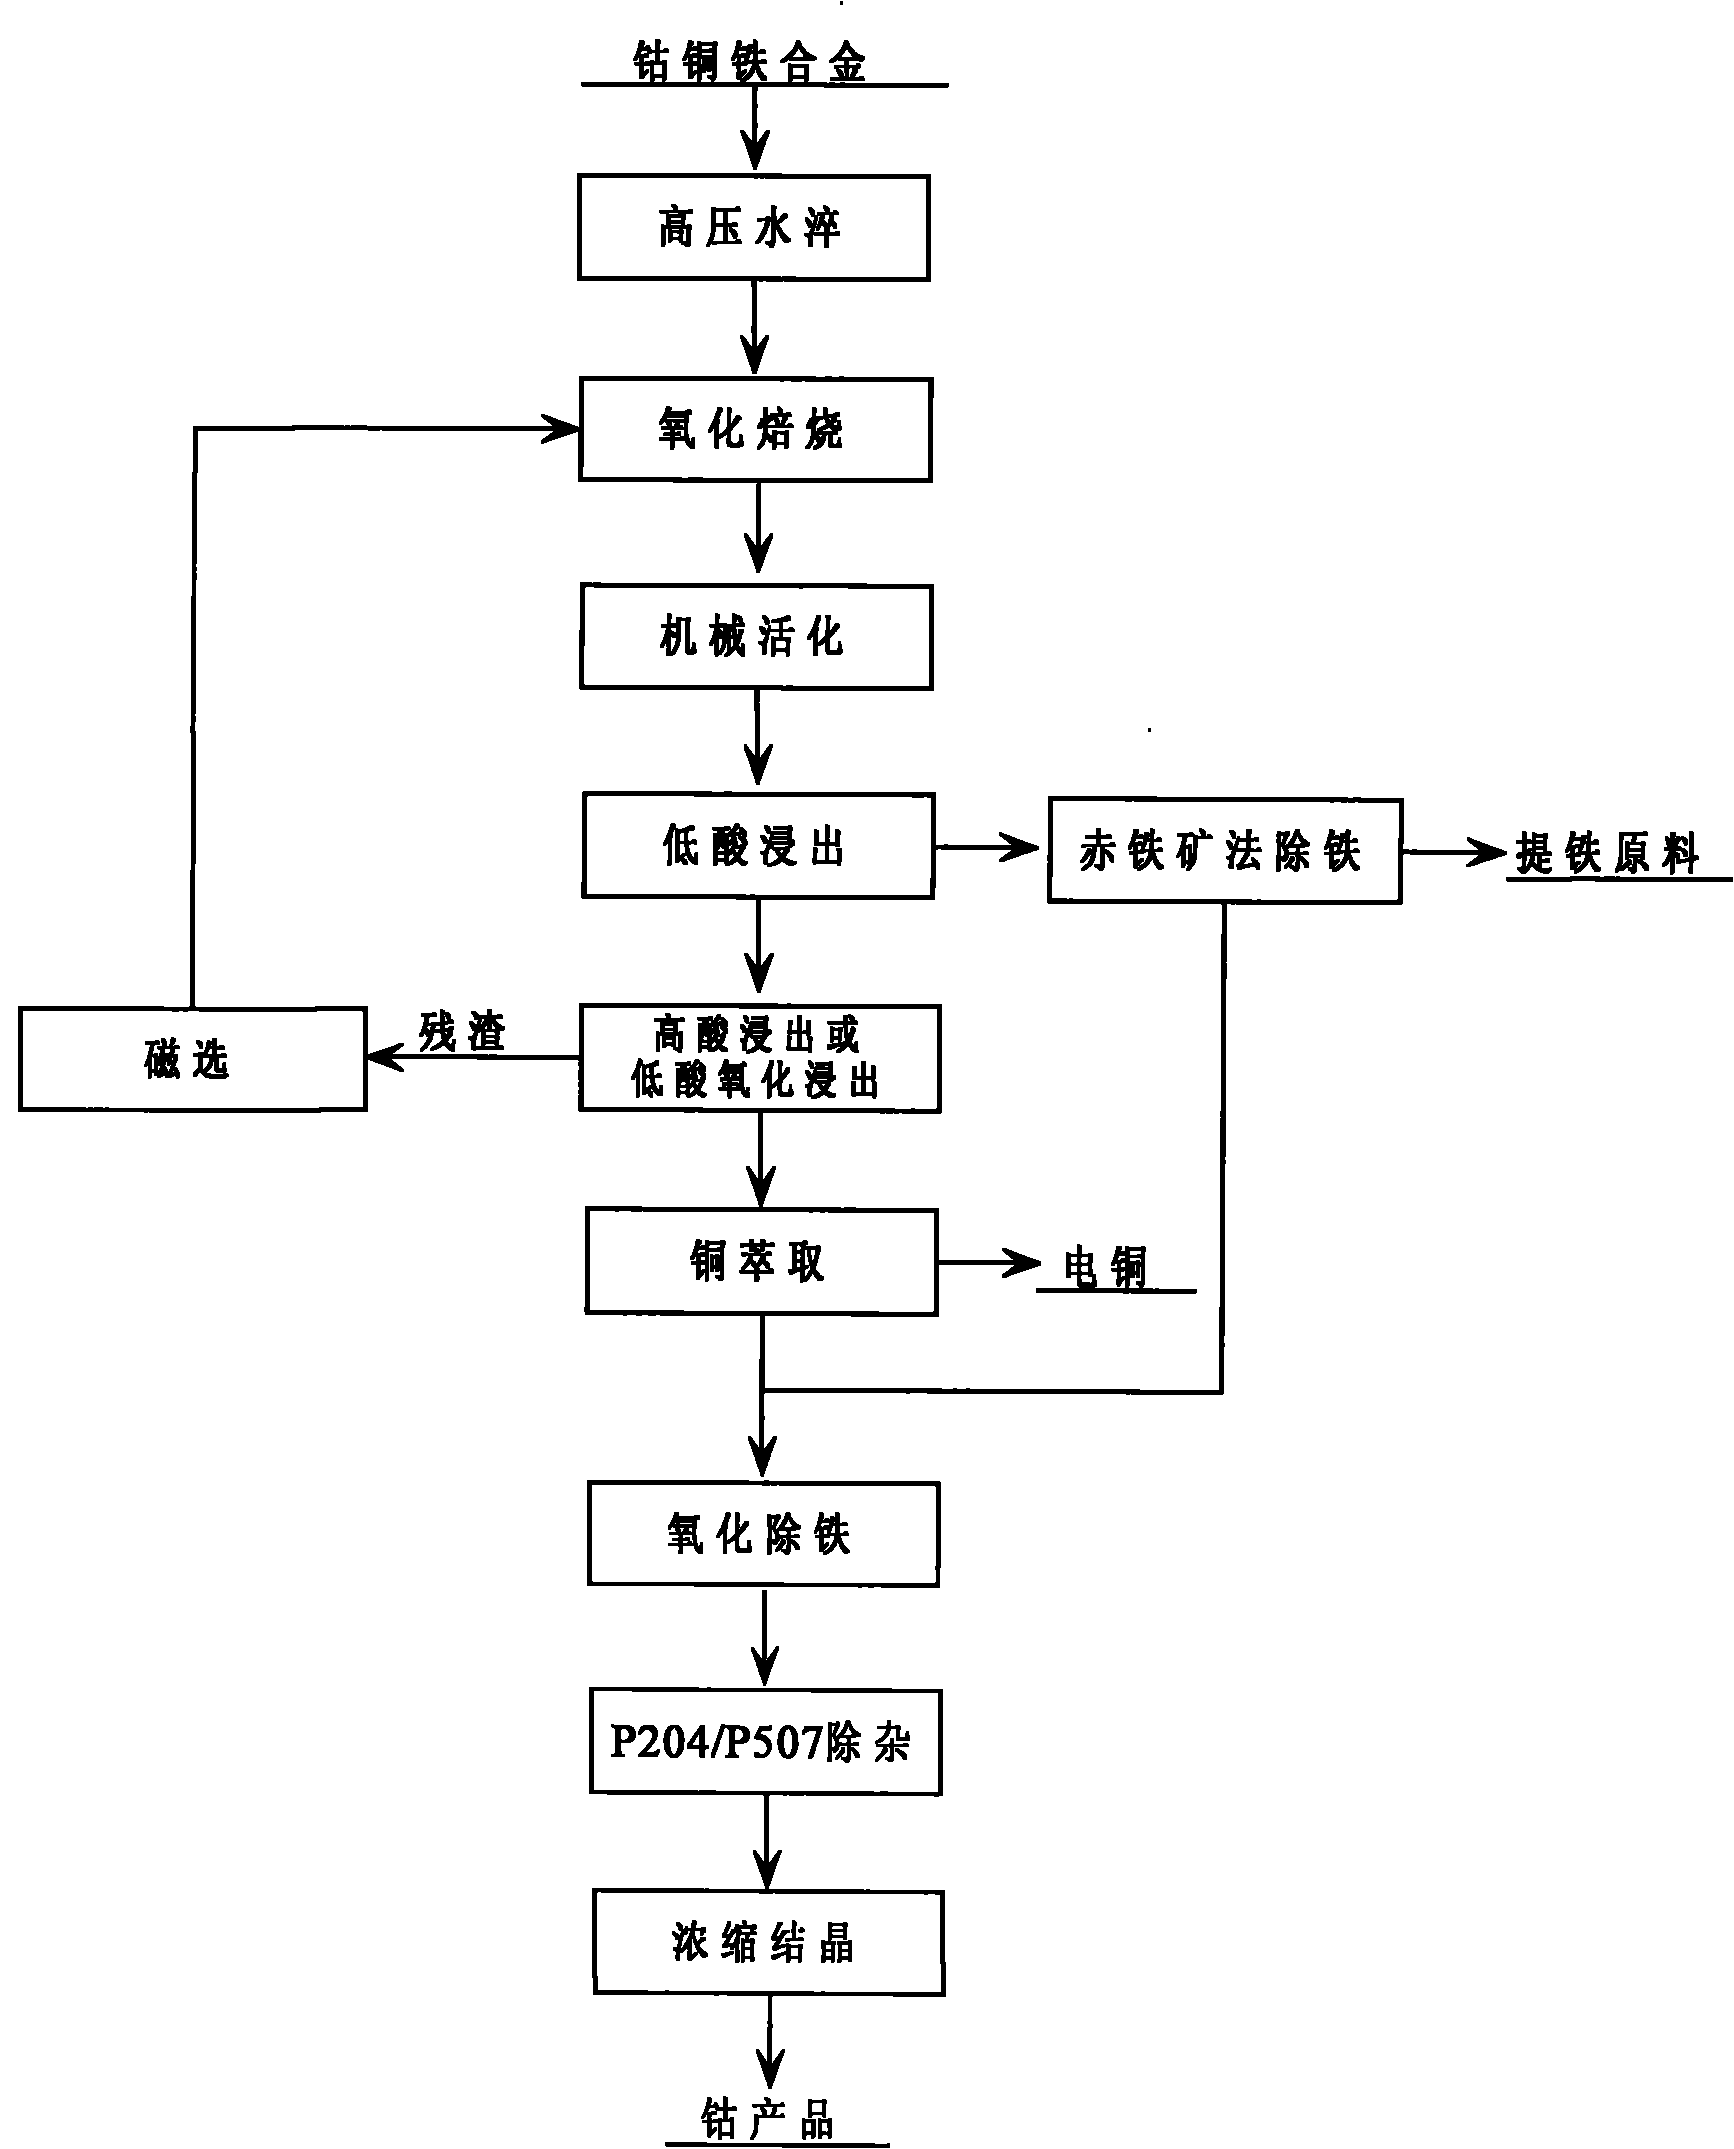 Method for processing cobalt-copper-iron alloy